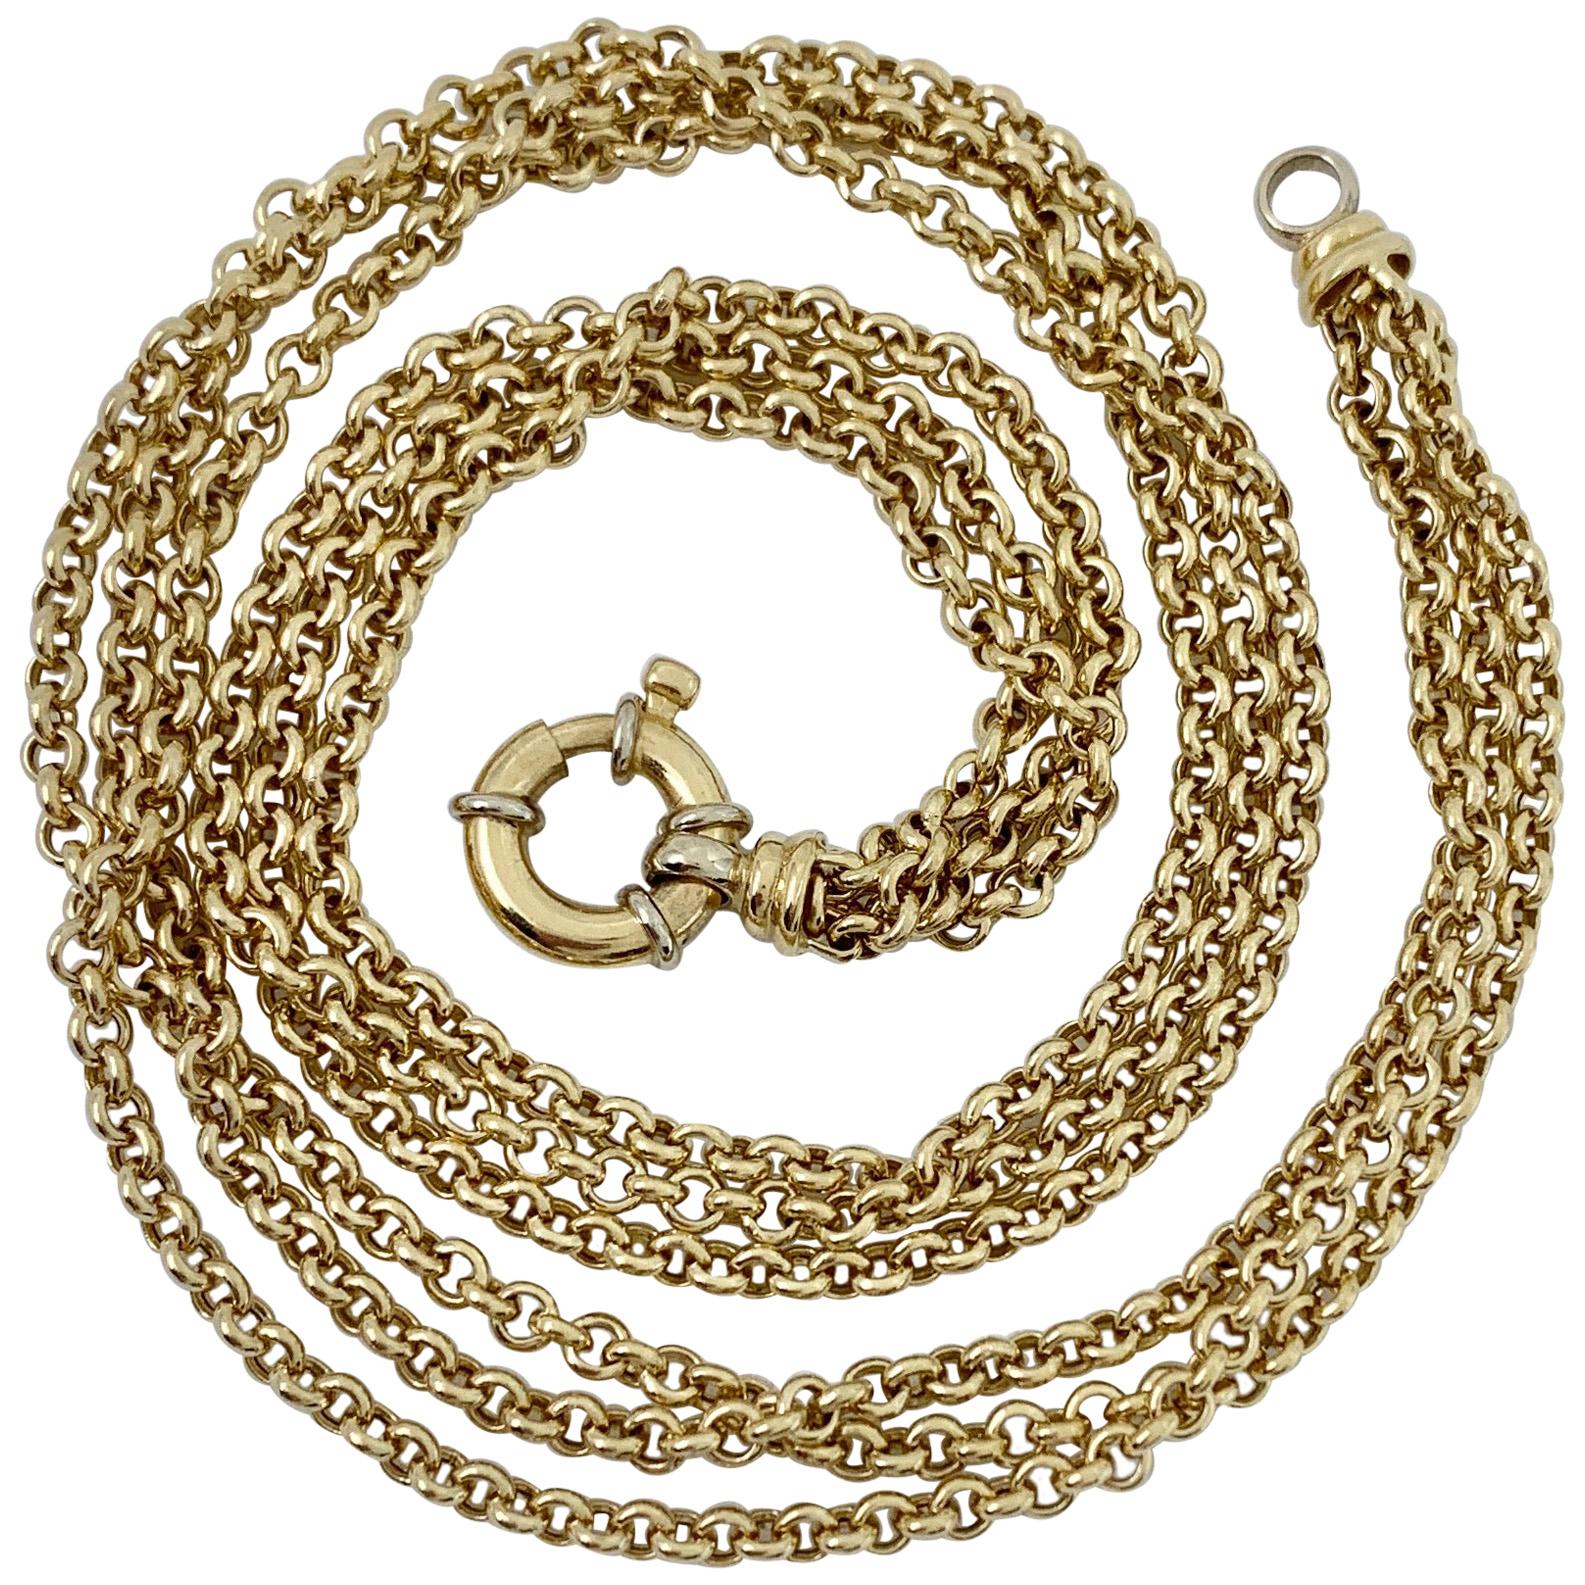 Choker Length Triple Rolo Chain with Bolt Ring Closure in 18 Karat Yellow Gold